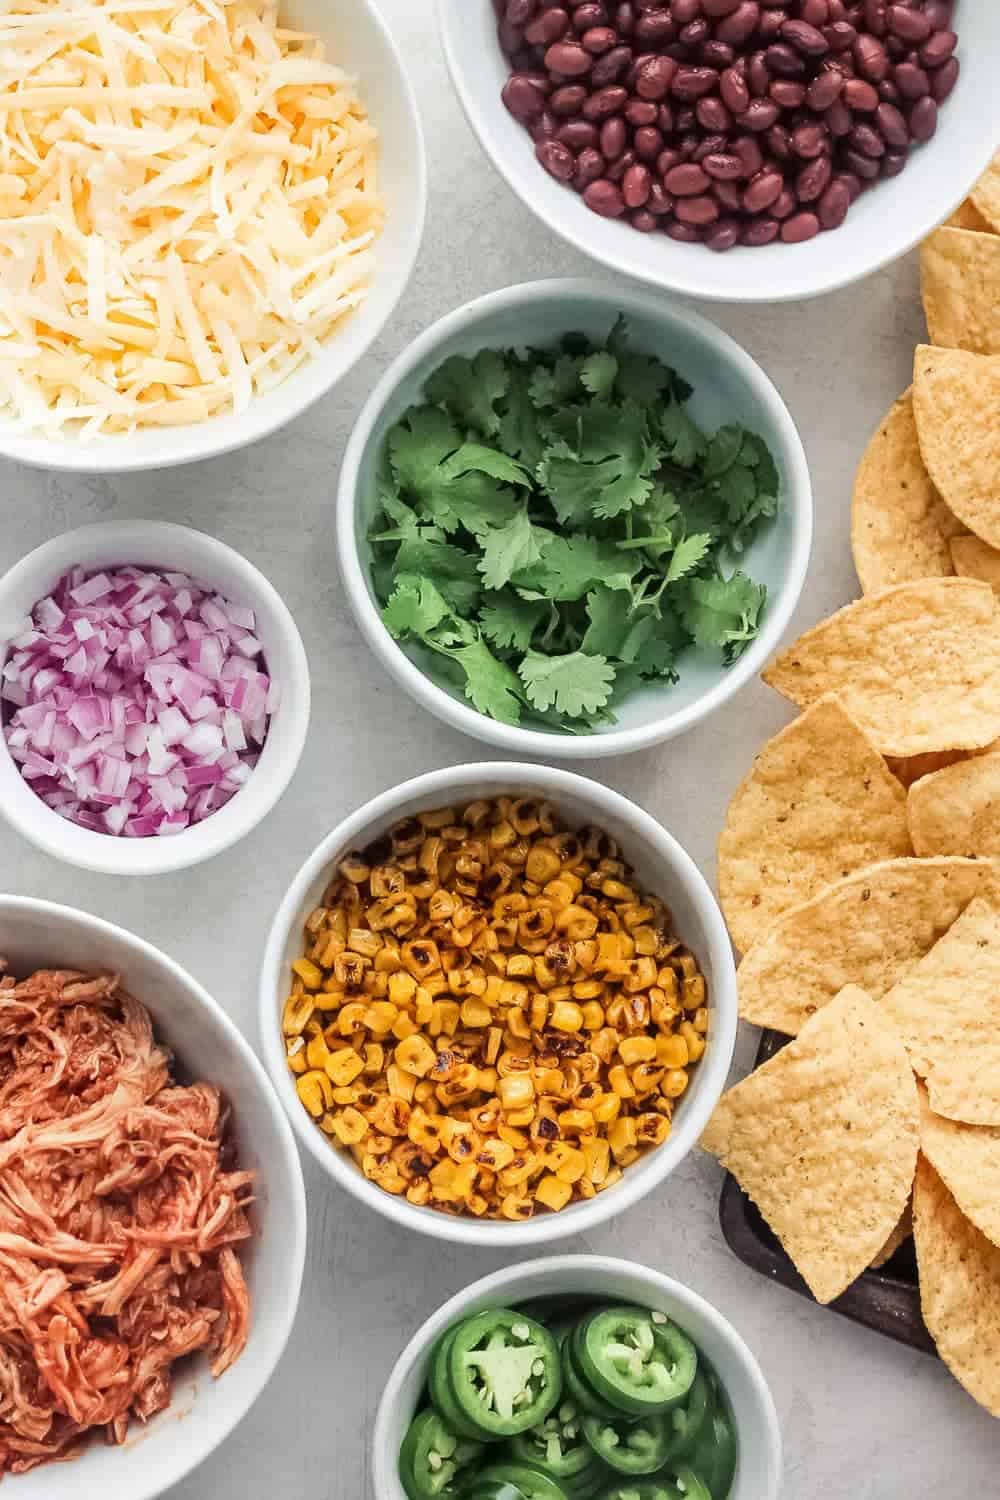 The ingredients to make the nachos